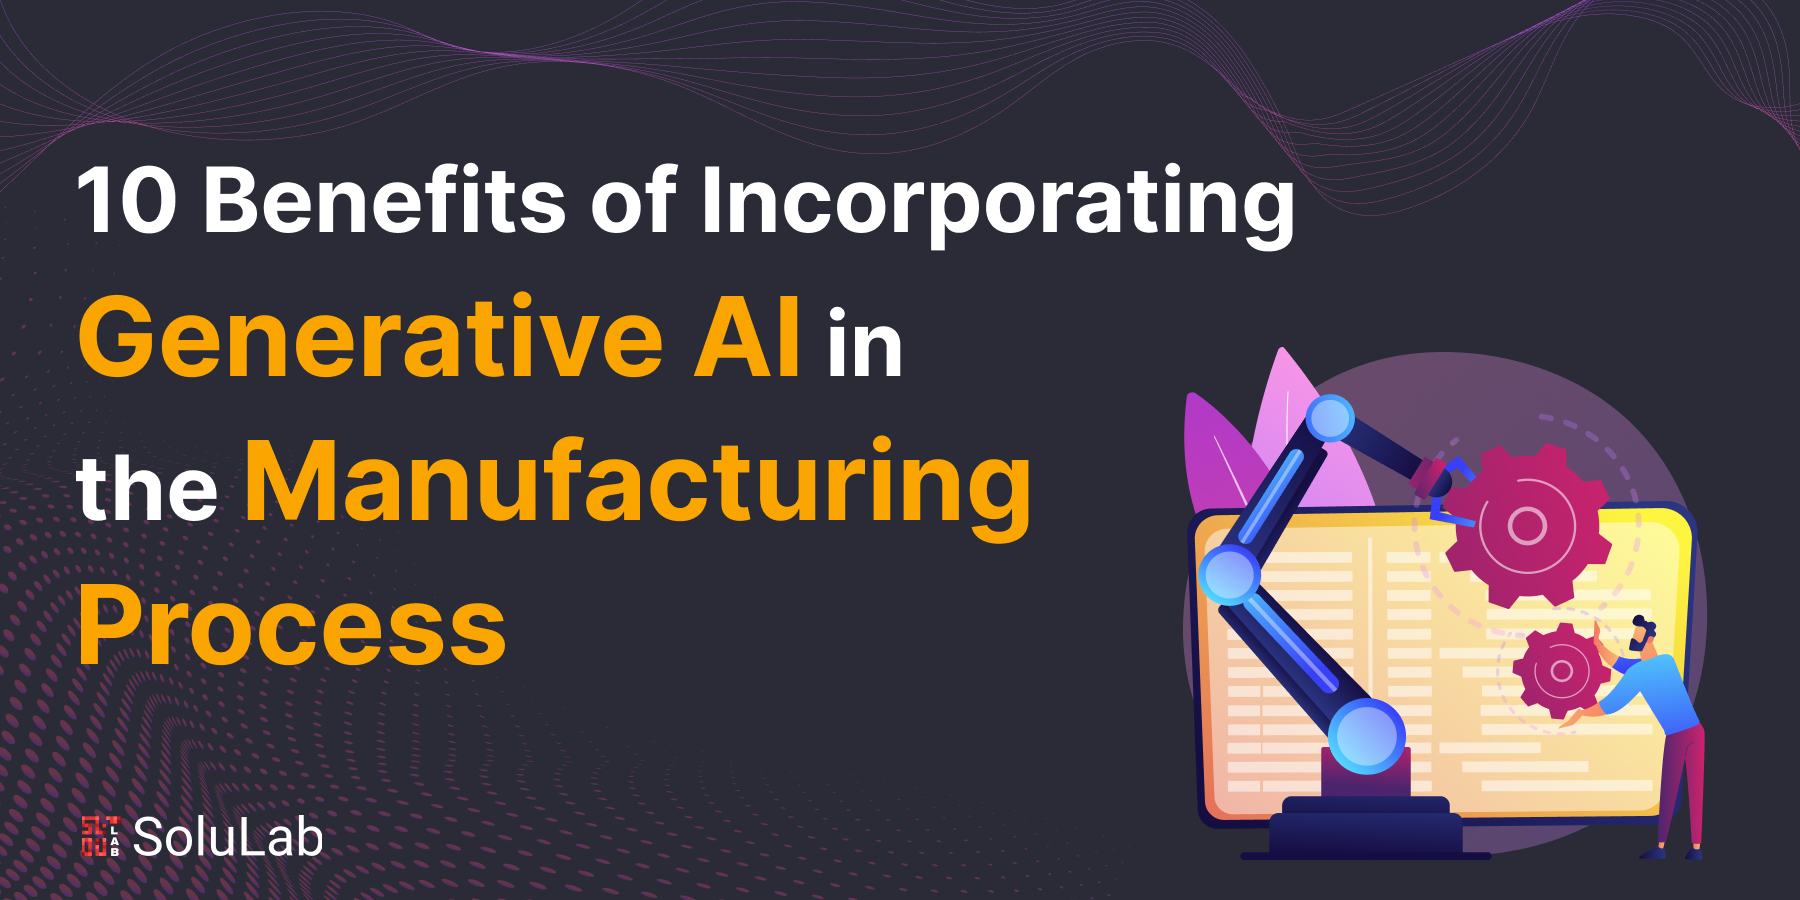 10 Benefits of Incorporating Generative AI in the Manufacturing Process